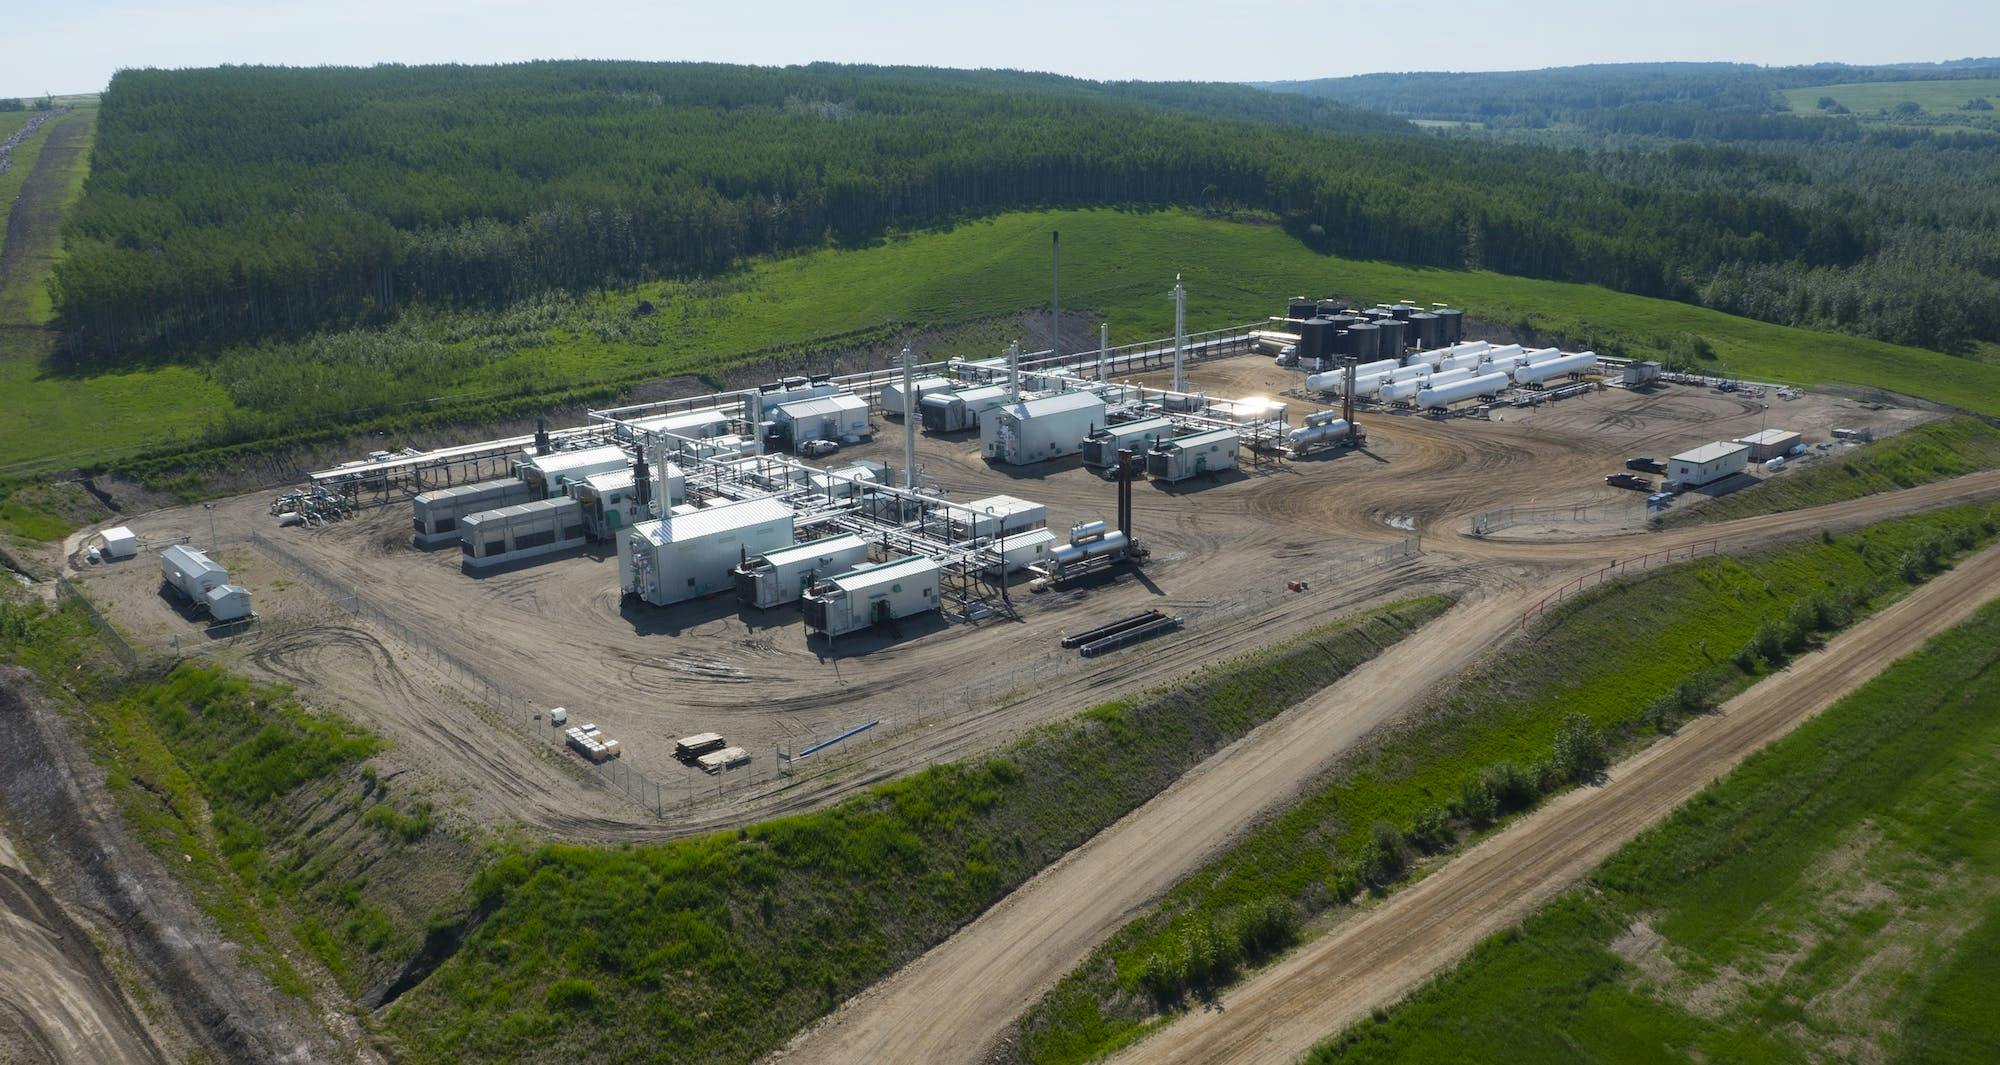 An aerial view of a gas plant during the day.